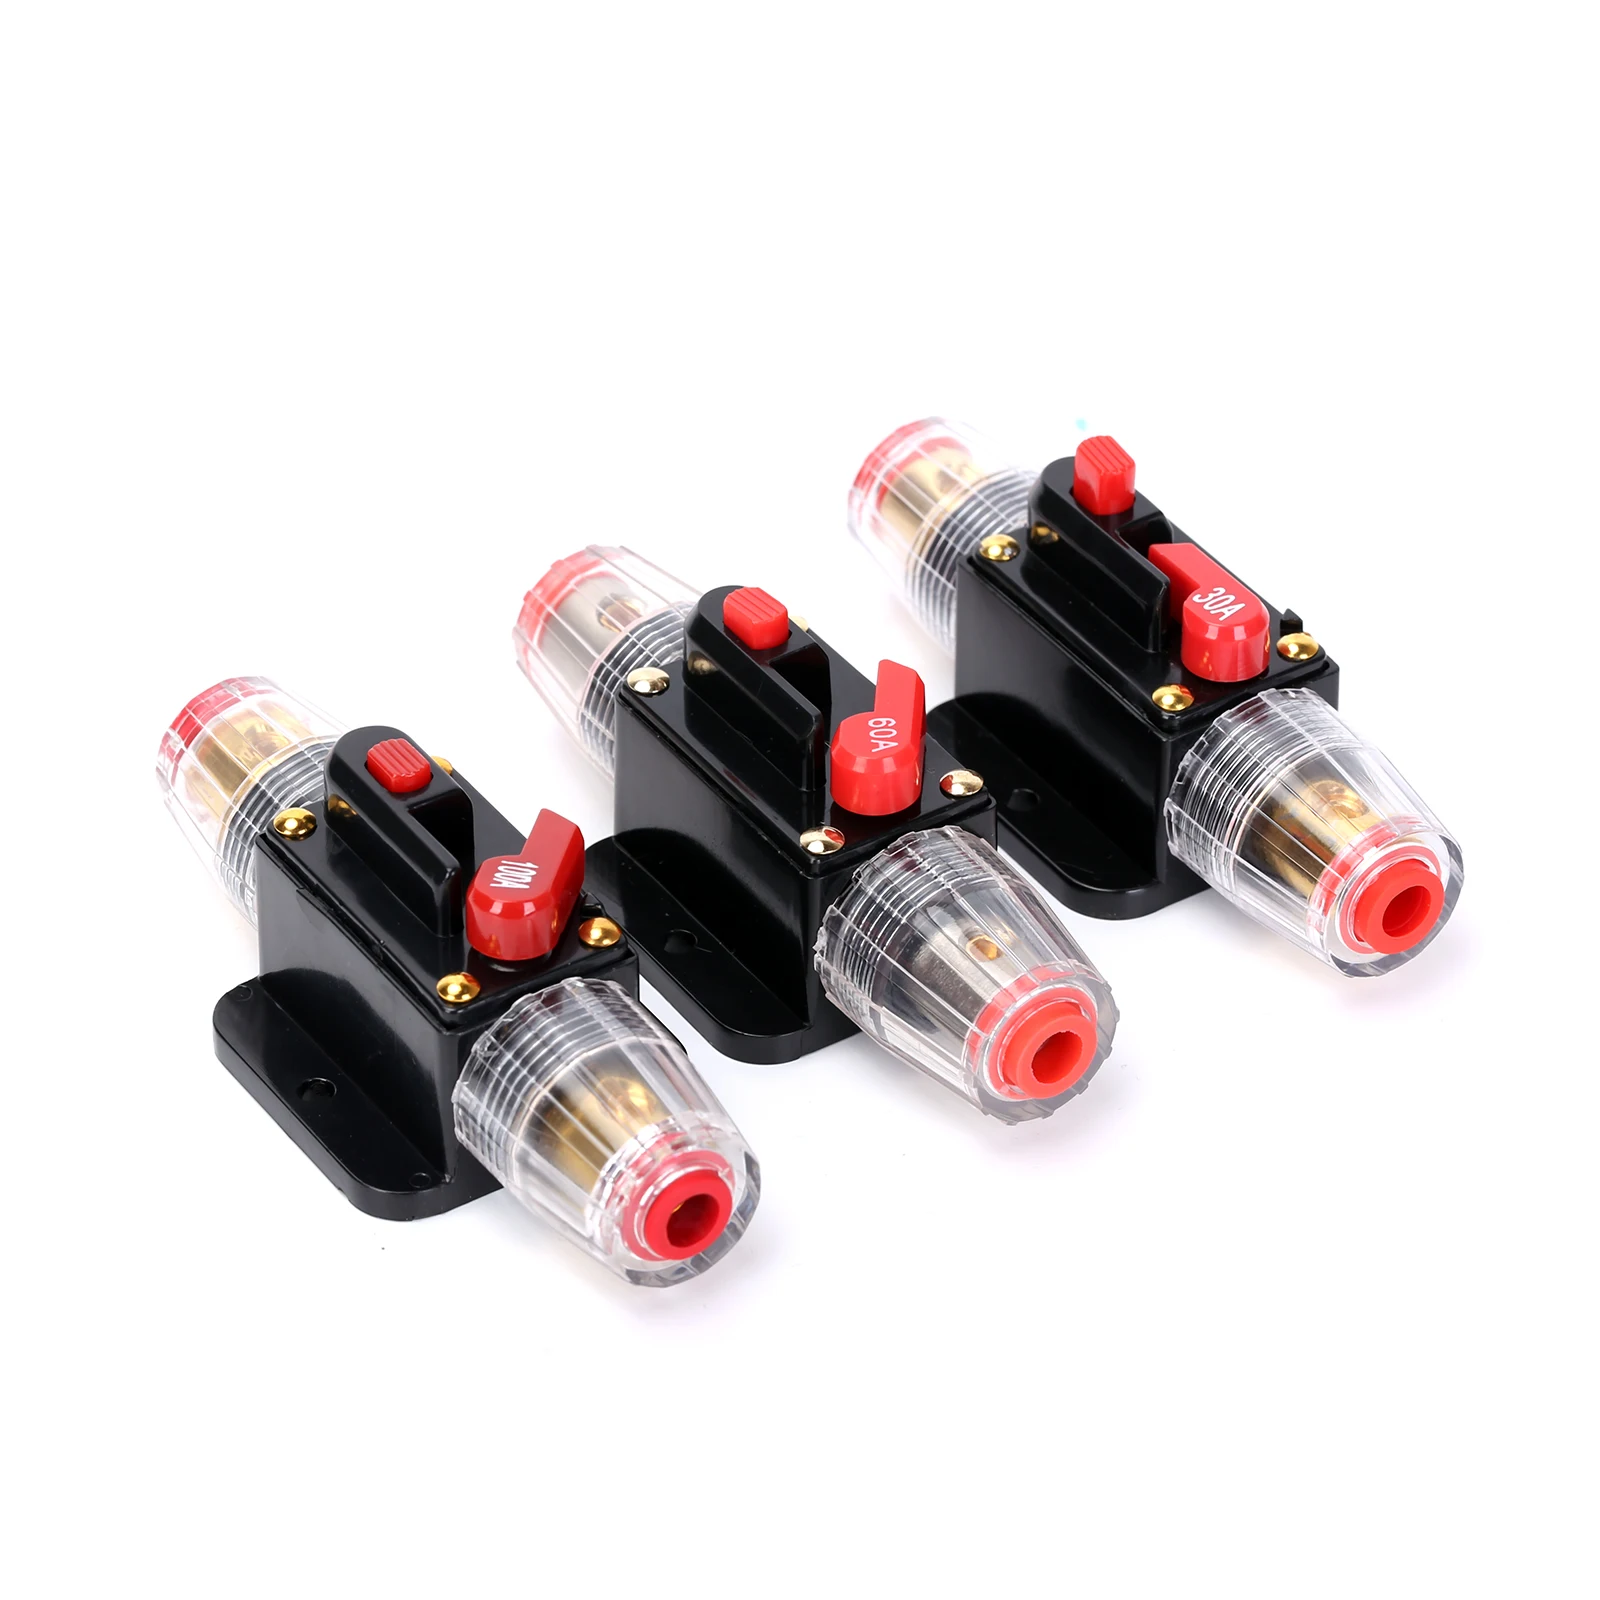 Details about   20A-100A AMP Circuit Breaker Car Marine Stereo Audio Inline Replace Fuse DC 12V 